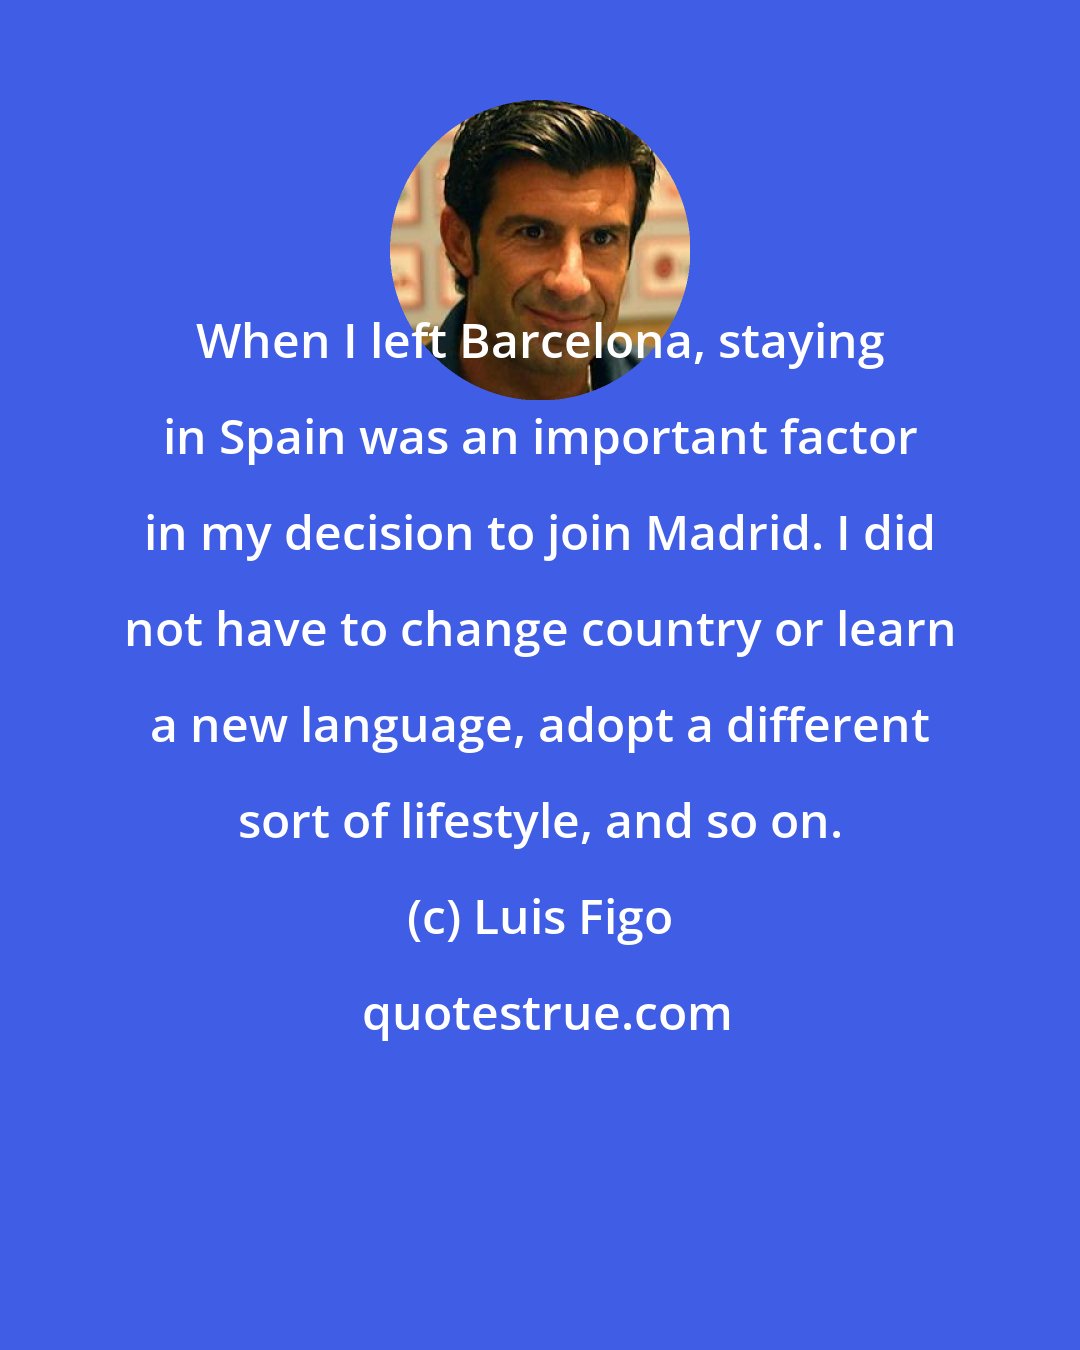 Luis Figo: When I left Barcelona, staying in Spain was an important factor in my decision to join Madrid. I did not have to change country or learn a new language, adopt a different sort of lifestyle, and so on.